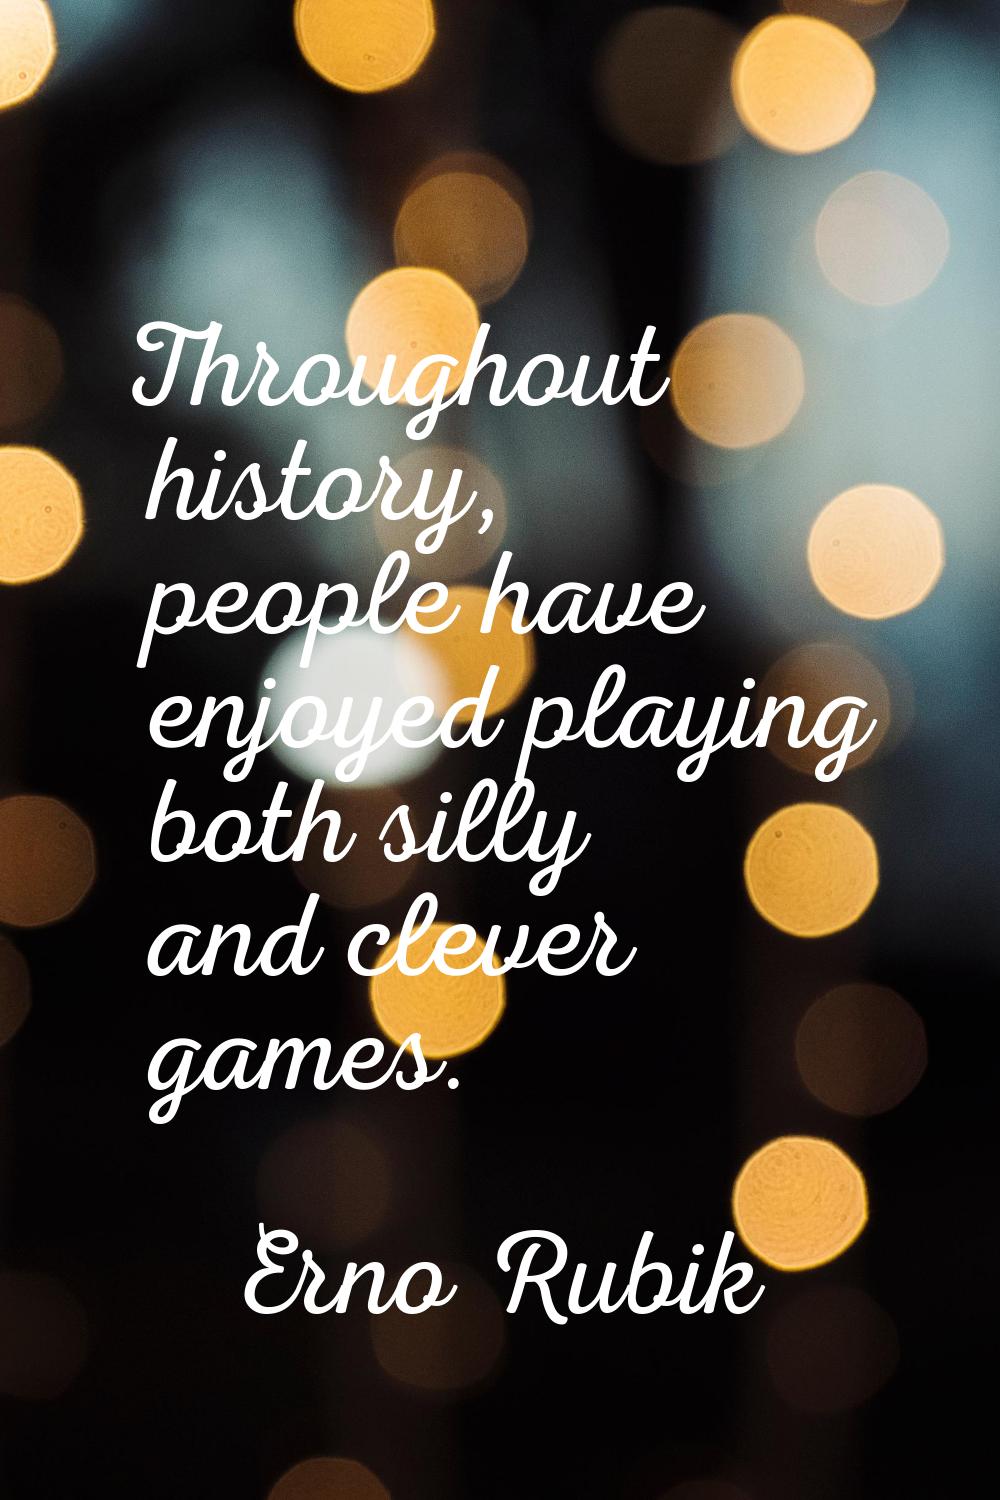 Throughout history, people have enjoyed playing both silly and clever games.